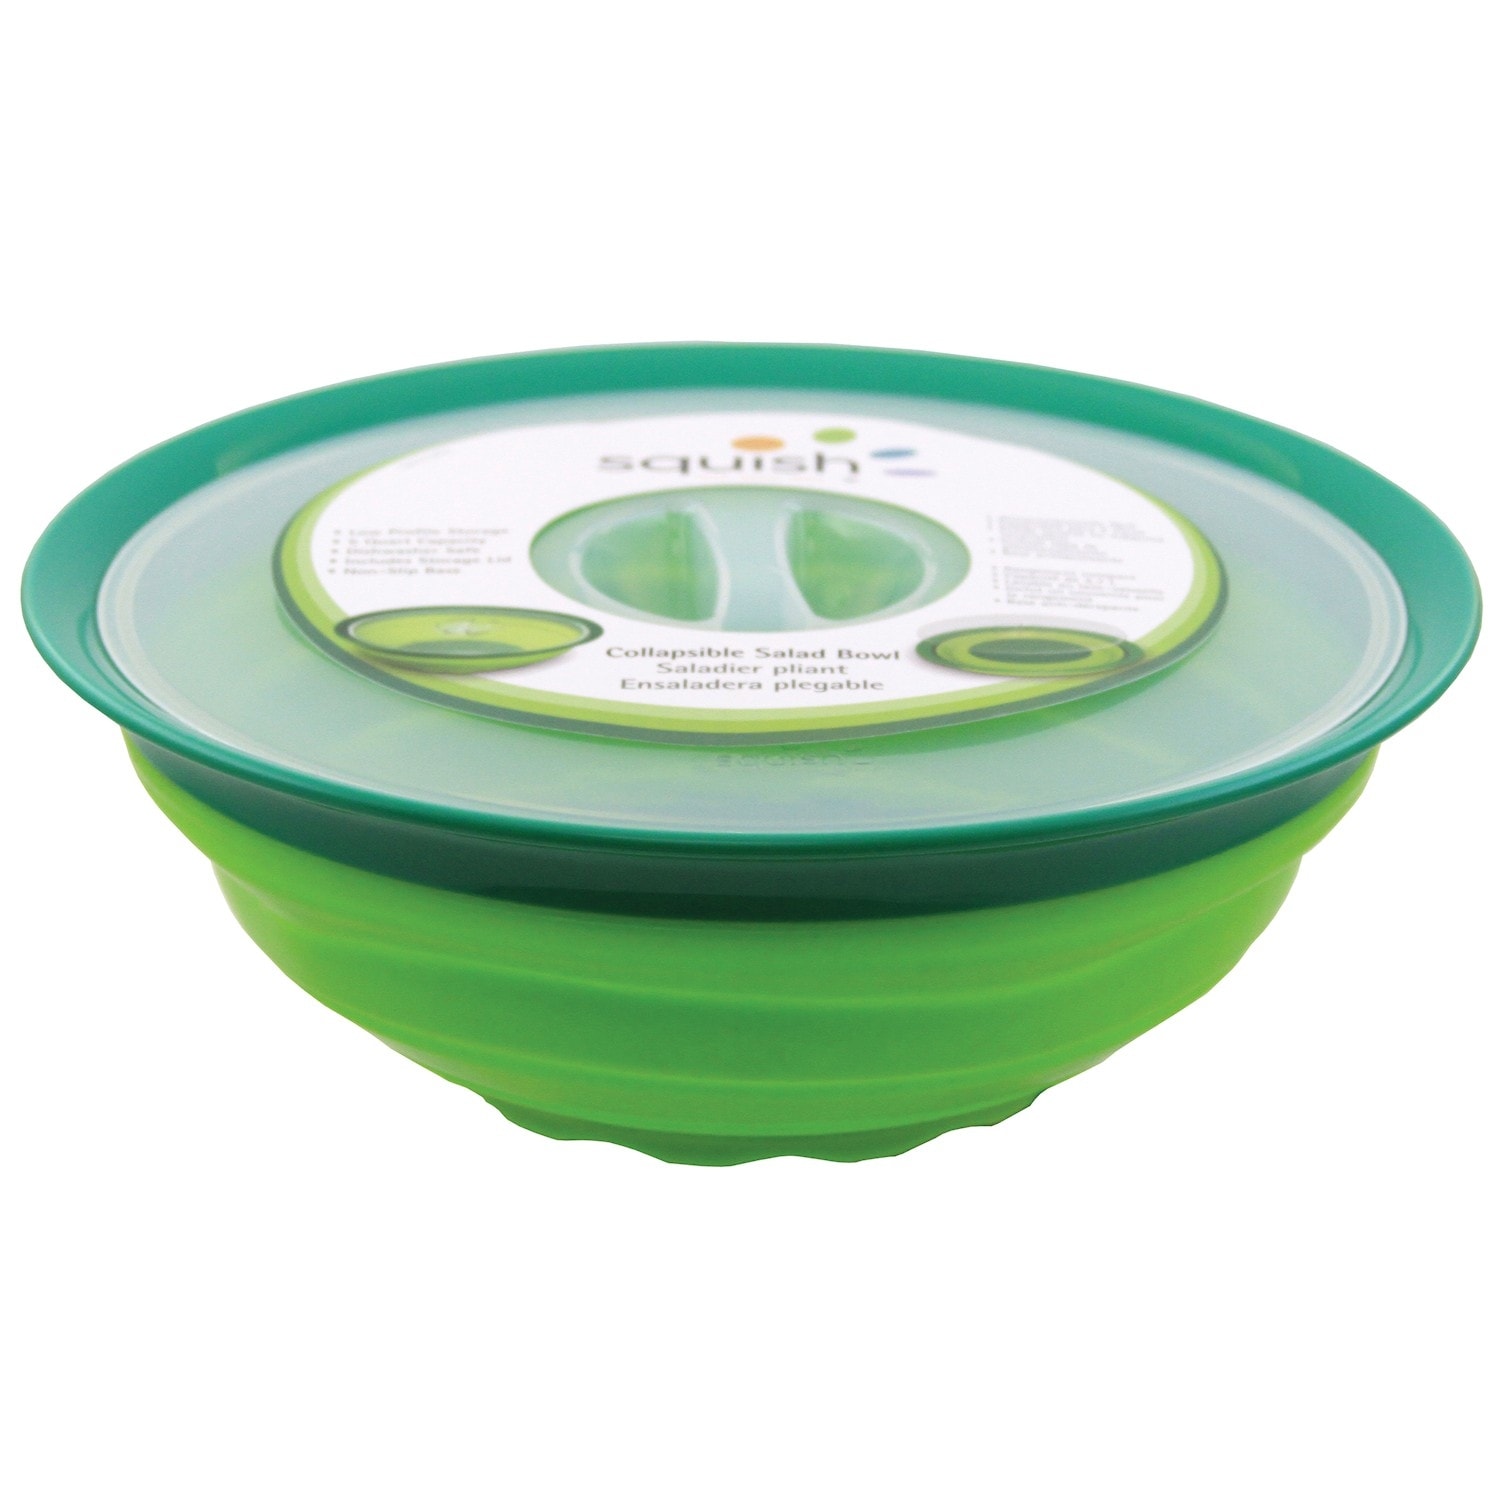 https://ak1.ostkcdn.com/images/products/is/images/direct/e0845a107cc95c5862dbe4aa64f2d7182e19cbd1/Squish-Collapsible-Salad-Bowl-with-Lid---5-Quart-Covered-Dish.jpg